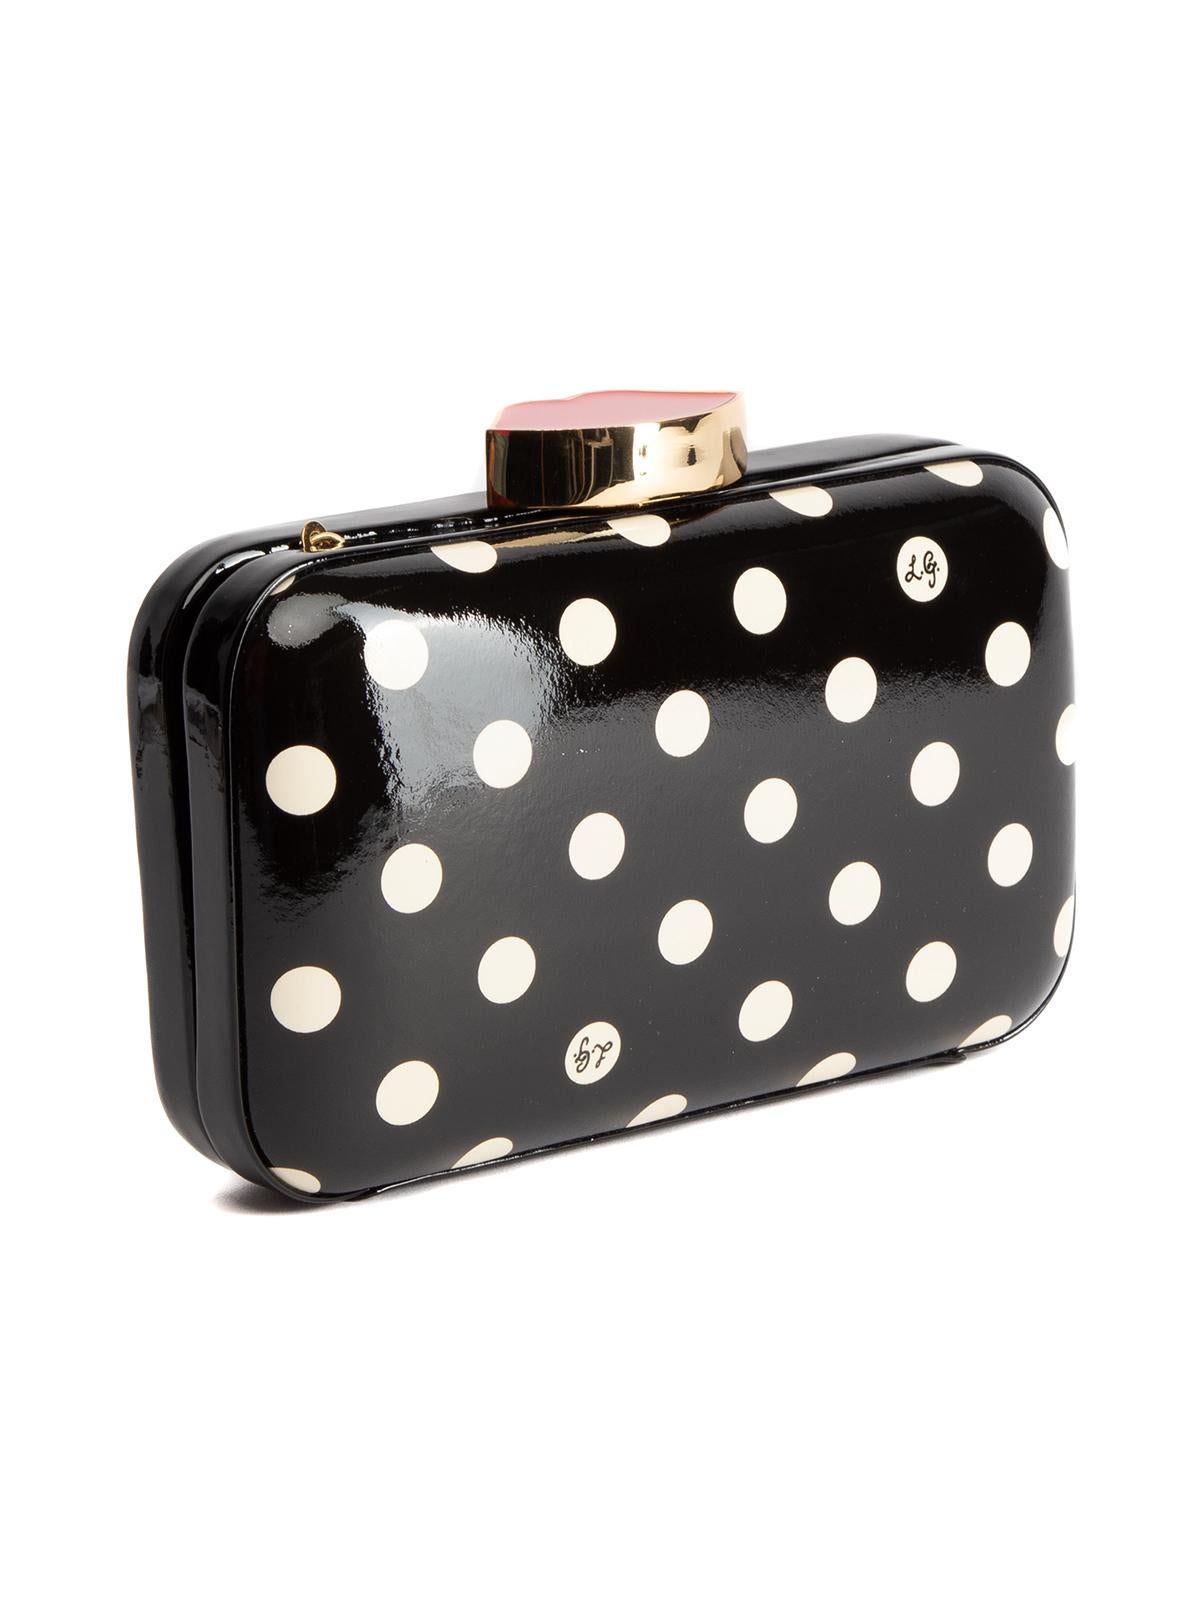 CONDITION is Very good. No visible wear to clutch is evident on this used Lulu Guinness designer resale item. Details Fifi clutch Dot print Patent leather Push lock fastening Black with cream dots and red lips Gold chain strap One main compartment